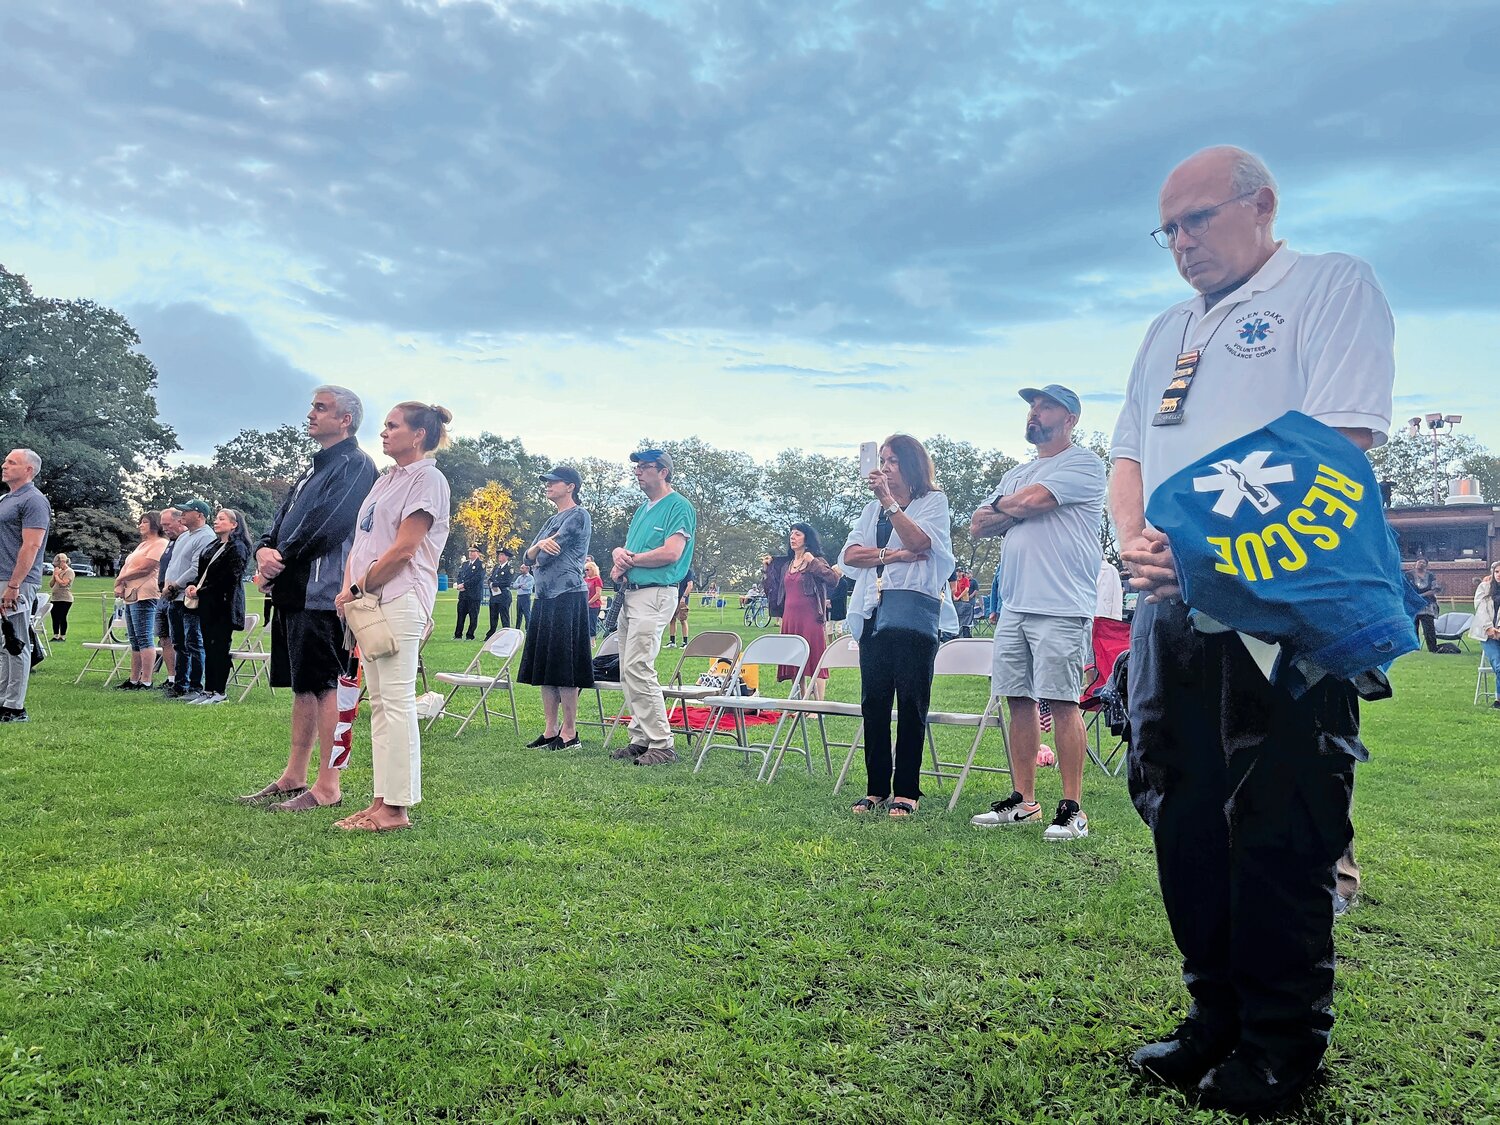 A member of the Glen Oaks Volunteer Fire Department in Floral Park stands and remembers those who were lost during the annual 9/11 Remembrance Ceremony at Eisenhower Park’s Harry Chapin Lakeside Theatre.